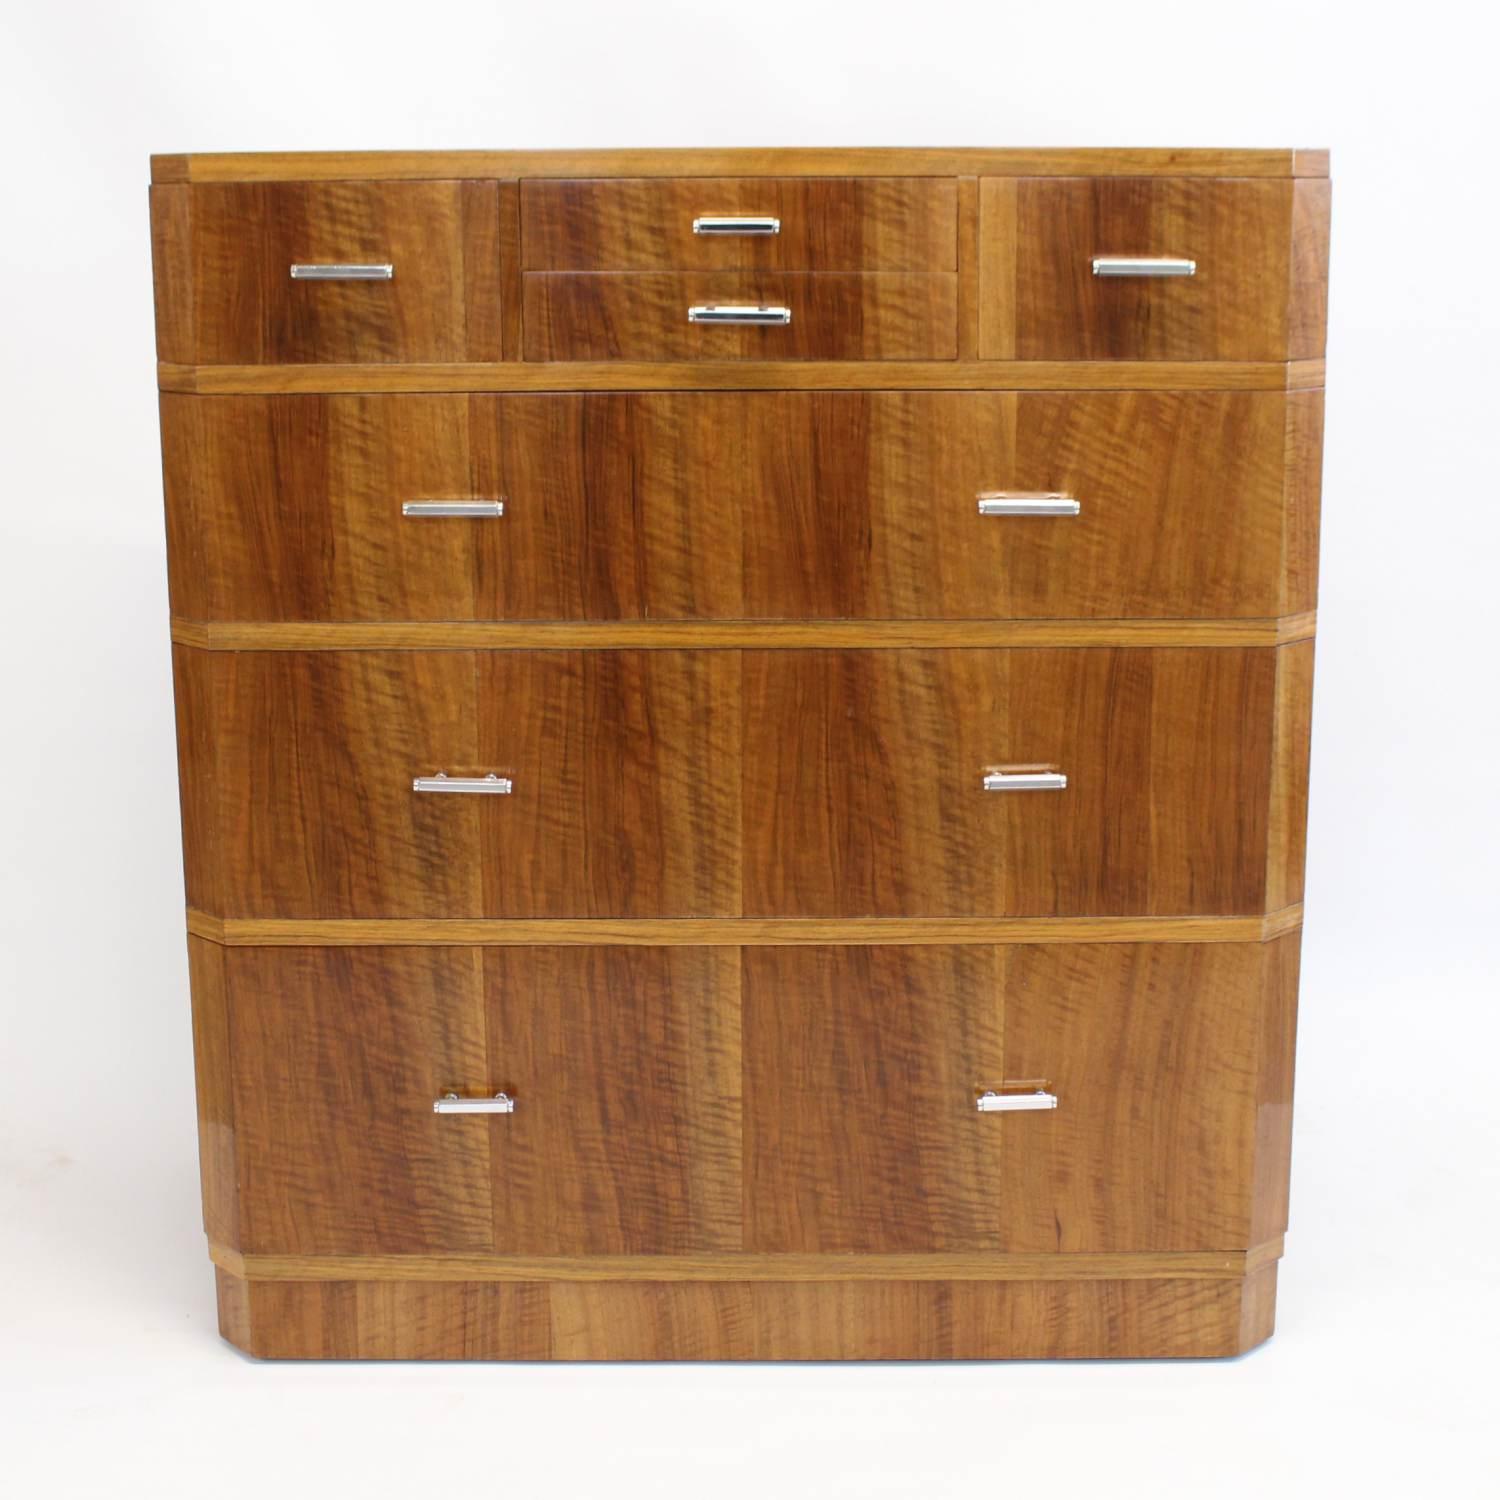 An Art Deco chest of drawers by Heal's of London. Three integral drawers to main body, two small drawers on top centre with two half sized drawers on either side. Straight grain walnut throughout, mahogany lined drawers, and original chrome handles.